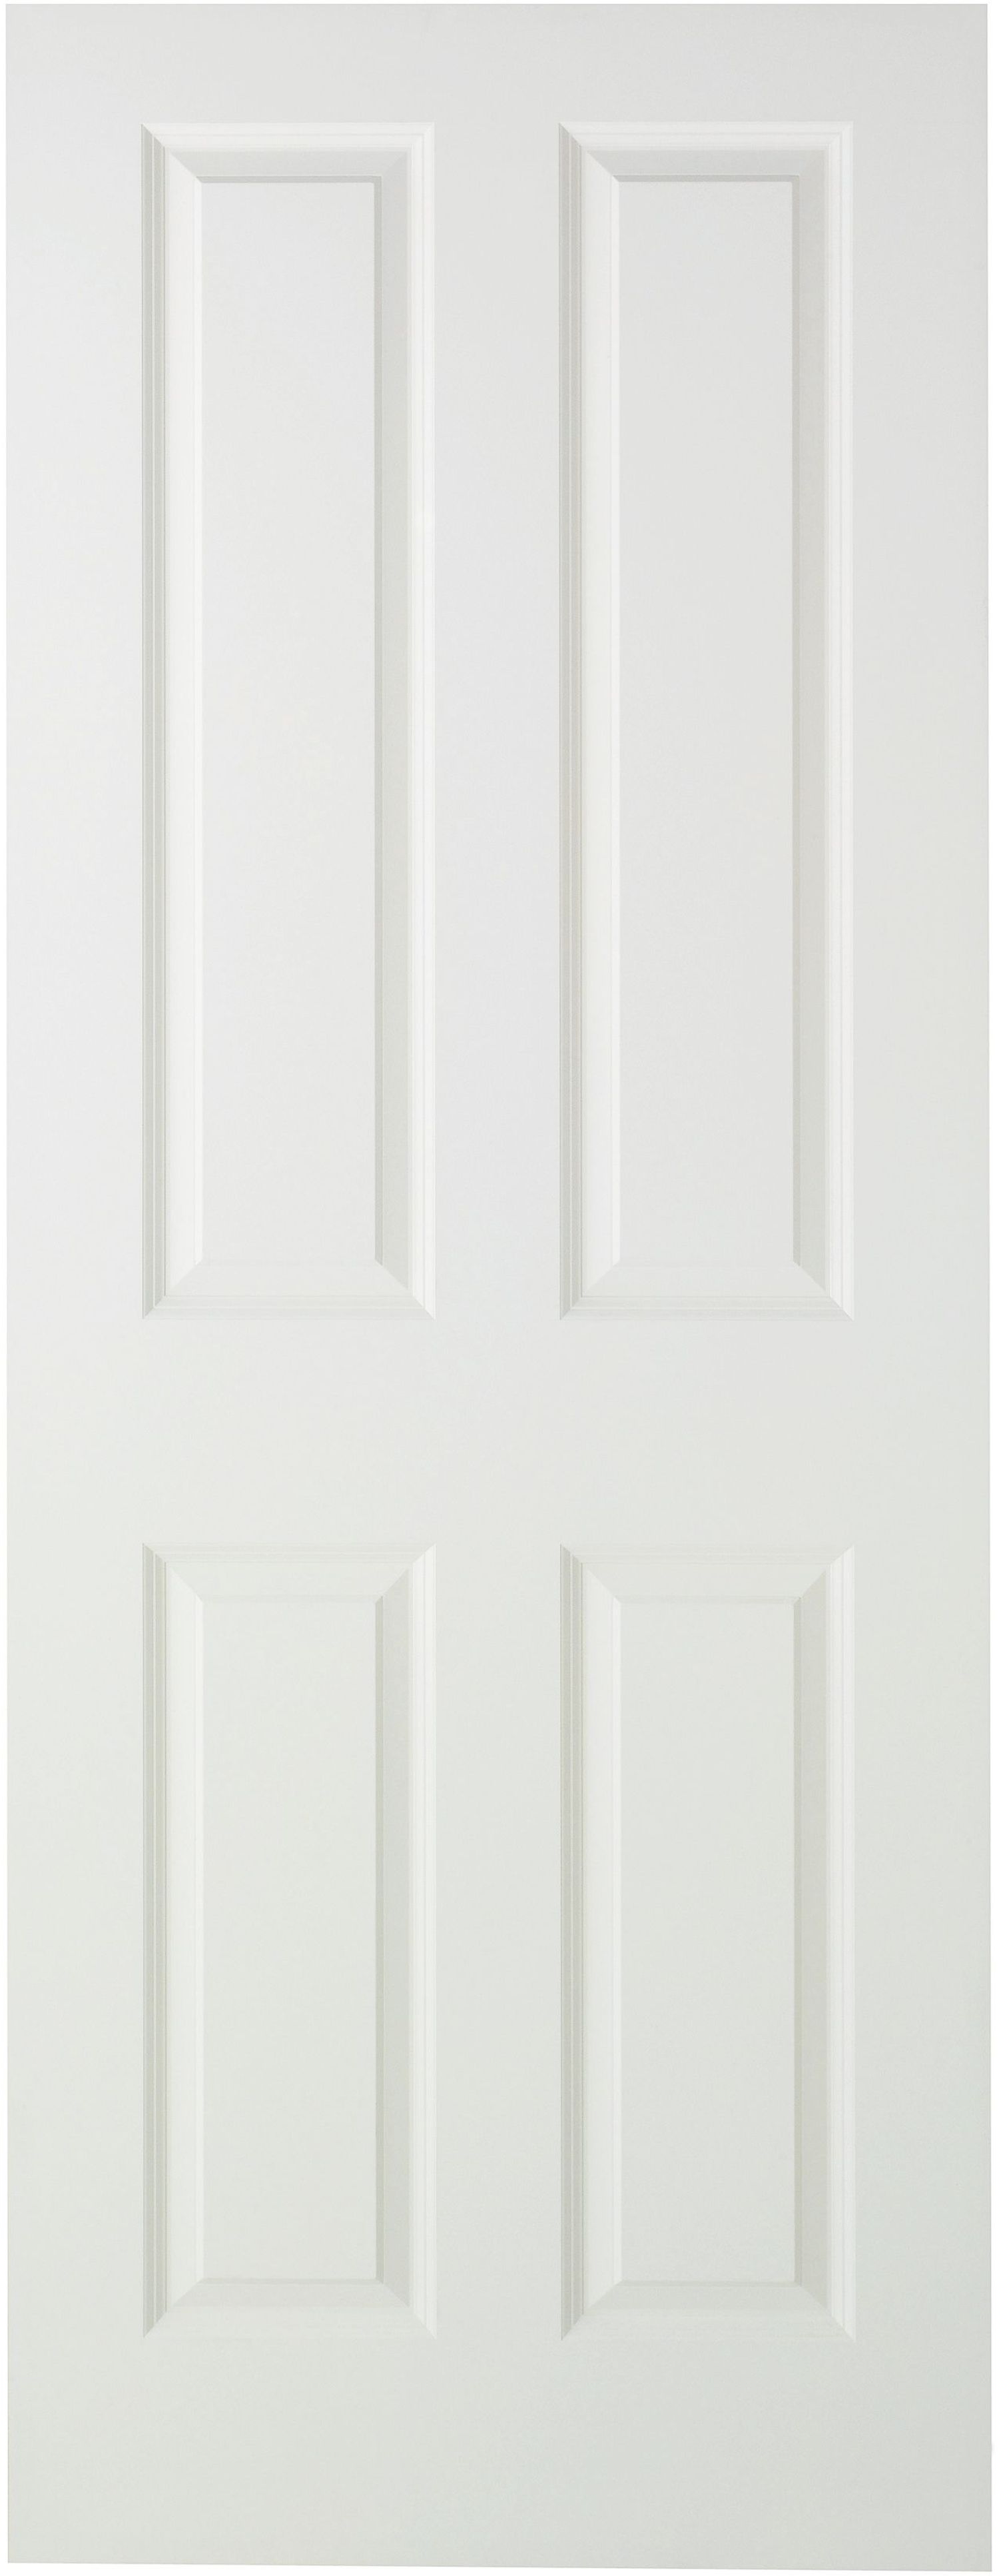 Image of Wickes Chester White Smooth Moulded 4 Panel FD30 Internal Fire Door - 1981 x 686mm